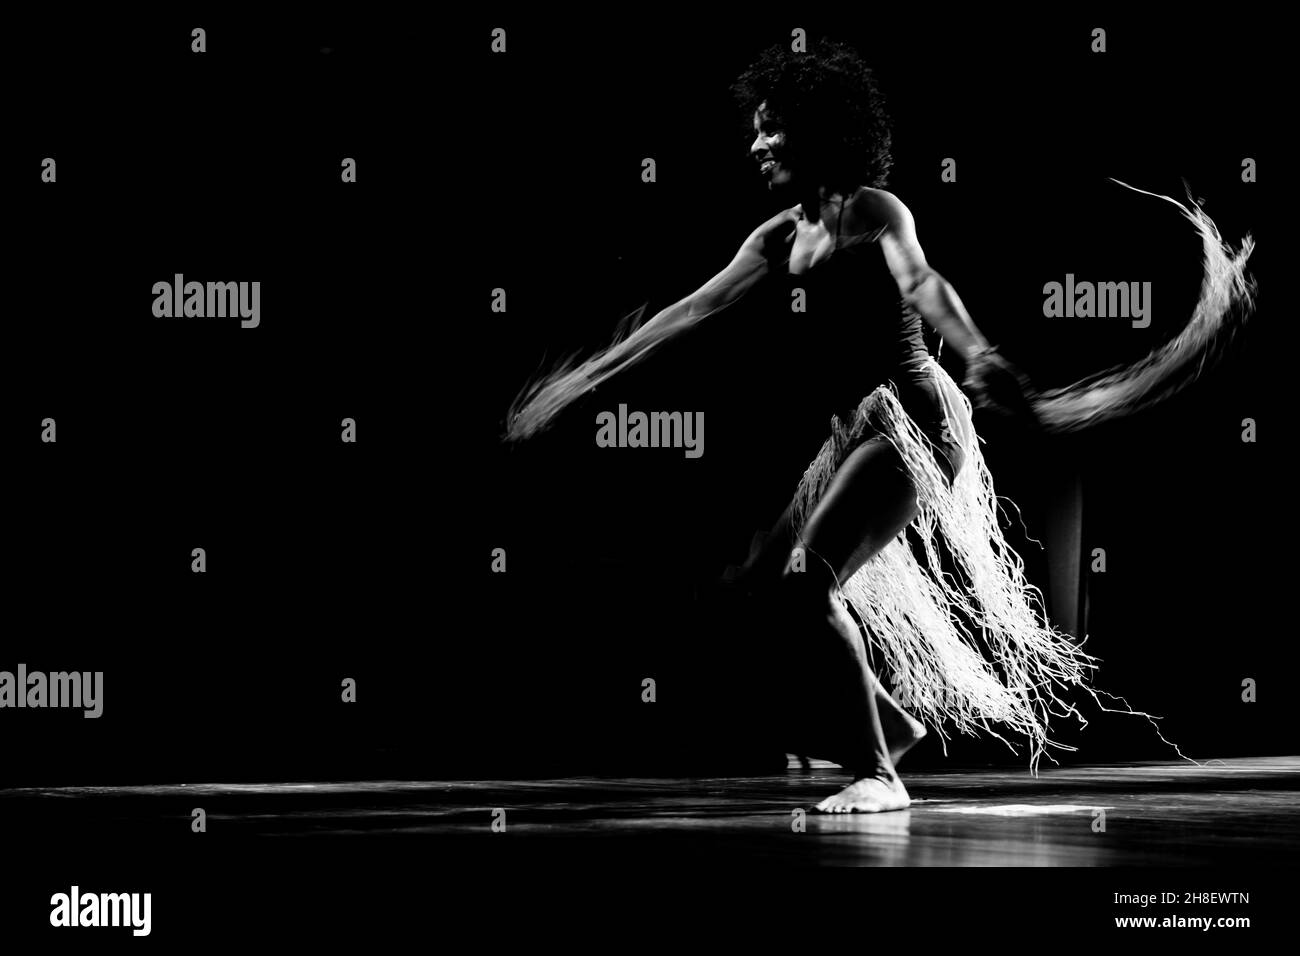 Black-and-white portrait of a woman dancing on stage against black background. Salvador, Bahia, Brazil. Stock Photo